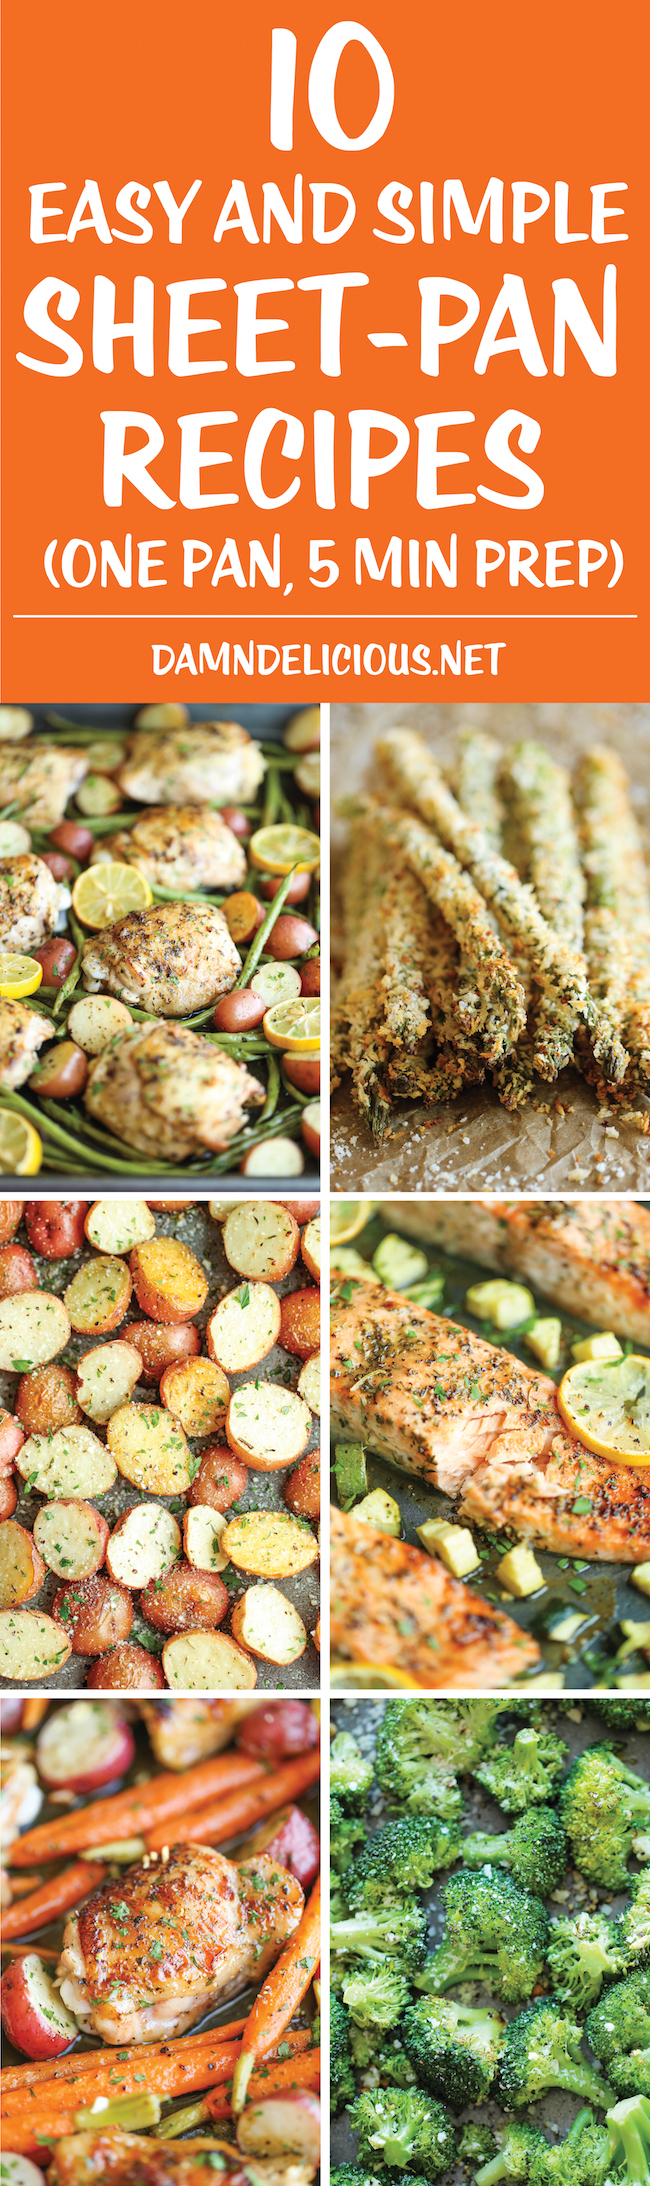 https://s23209.pcdn.co/wp-content/uploads/2015/06/10-Easy-and-Simple-Sheet-Pan-Recipes.jpg